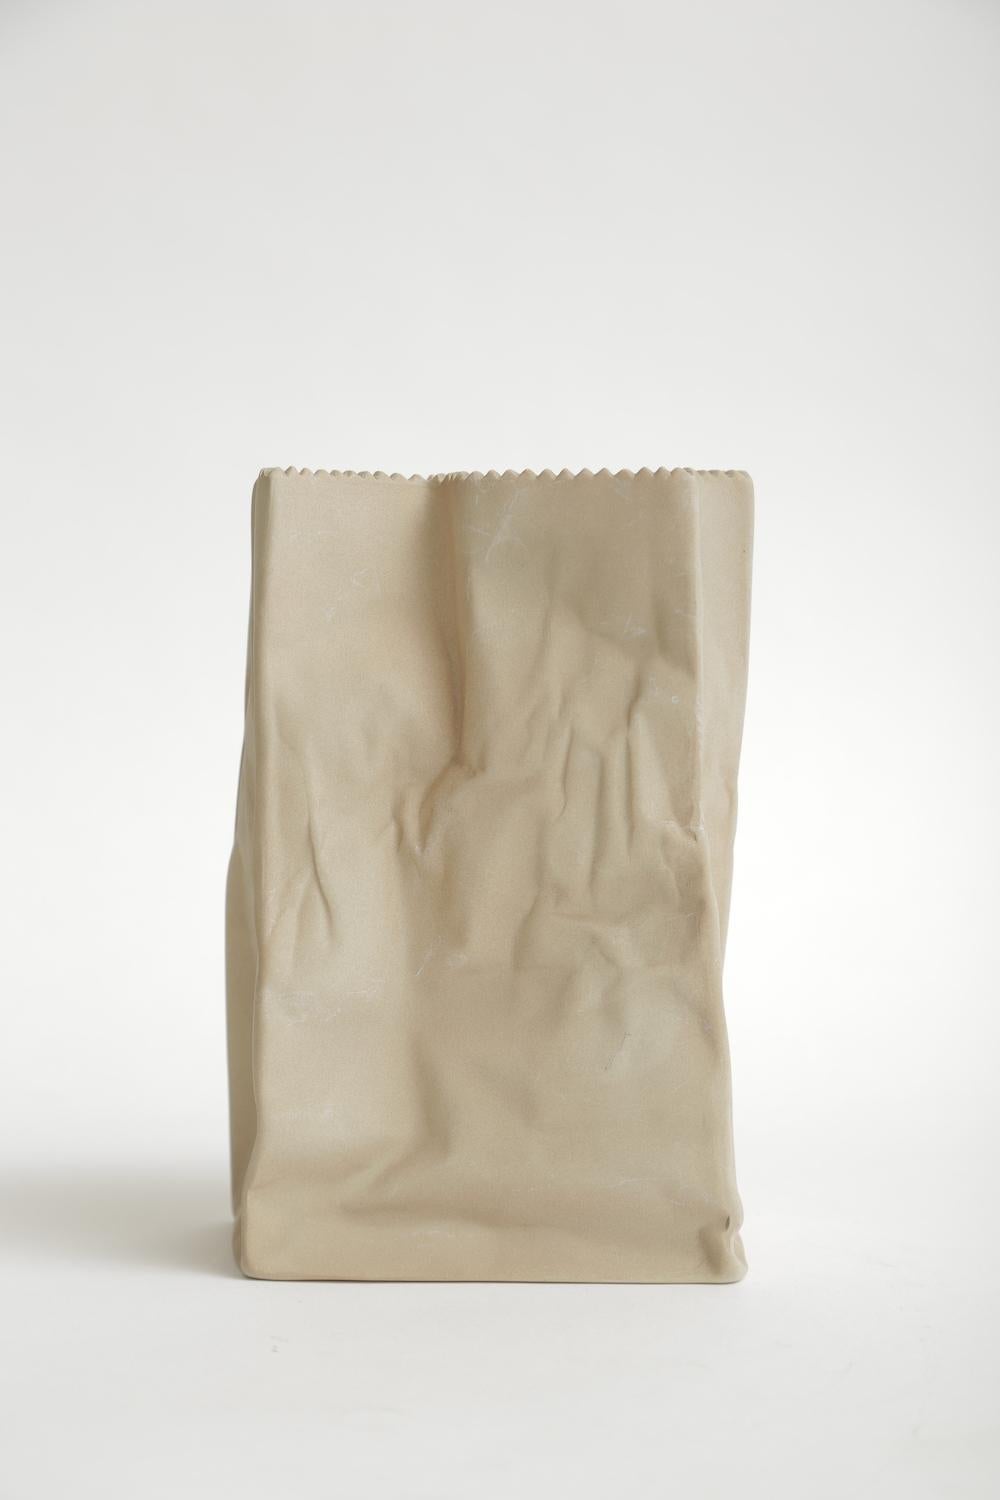 This crushed Rosenthal porcelain brown paper bag sculpture is vintage. It is from the 1970s. Always popular and desirable. It is part pop art and part modern sculpture in porcelain form. Please note: This is now on sale at a great price.